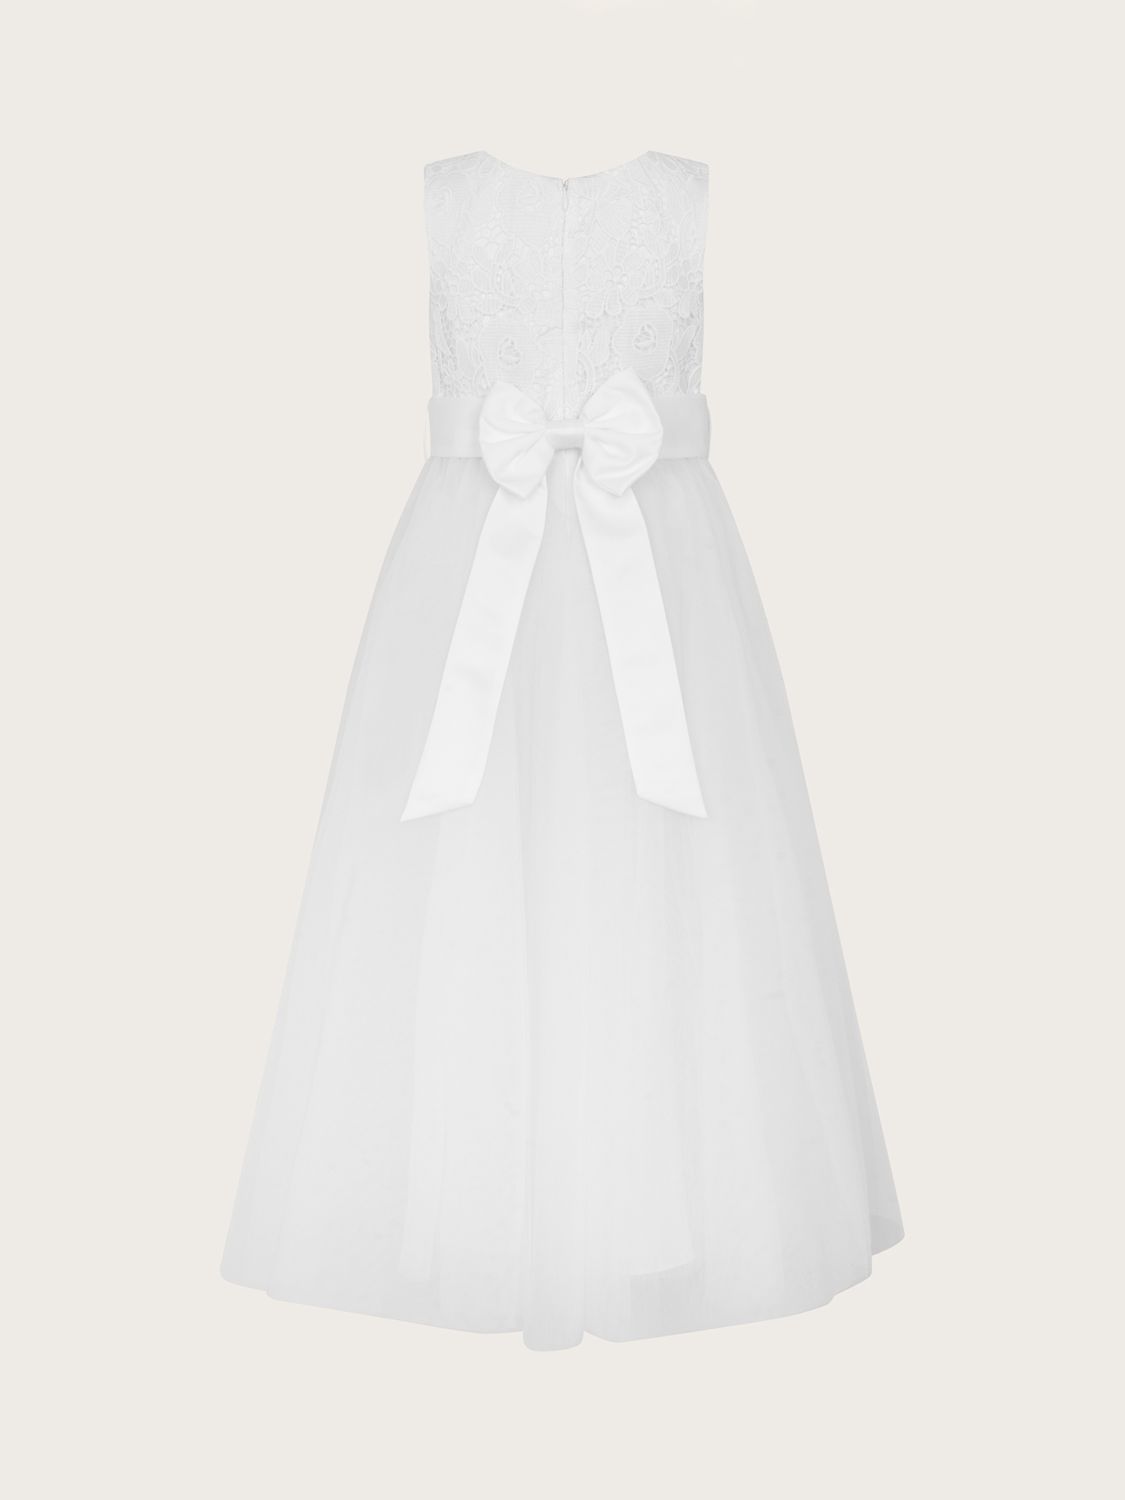 Buy Monsoon Kids' Alice Lace Tulle Maxi Dress Online at johnlewis.com